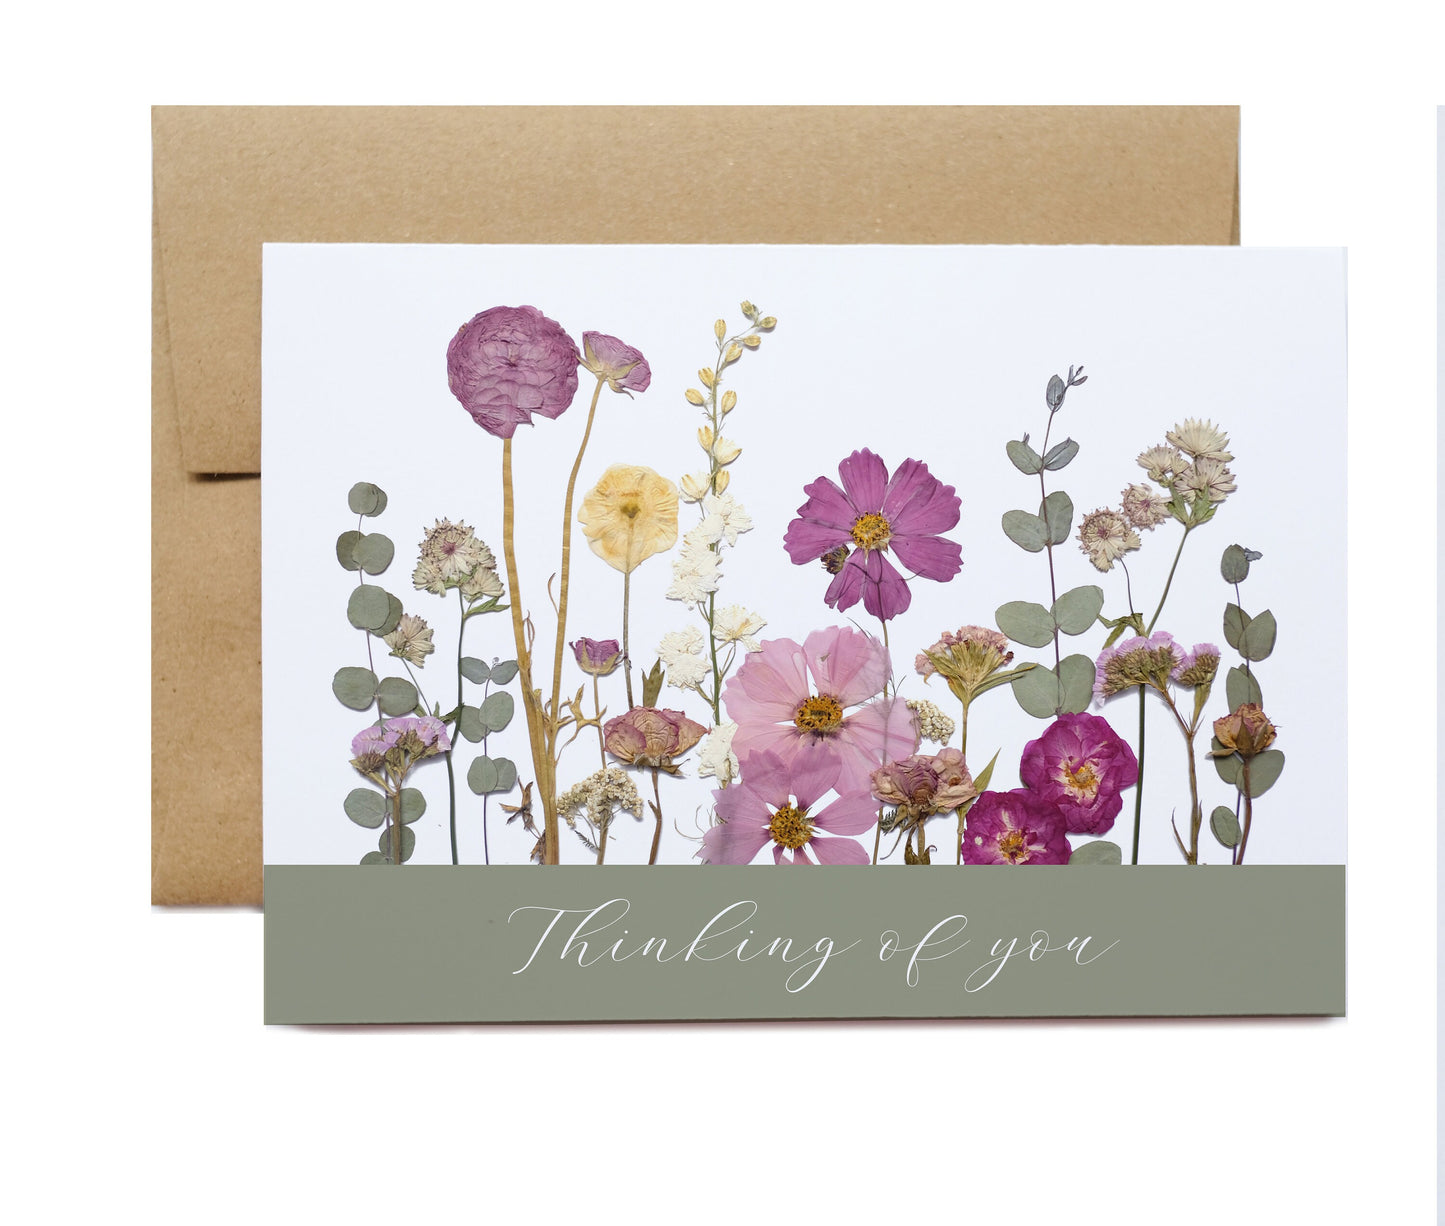 pressed flower thinking of you card natural design pink and purple flowers and greenery